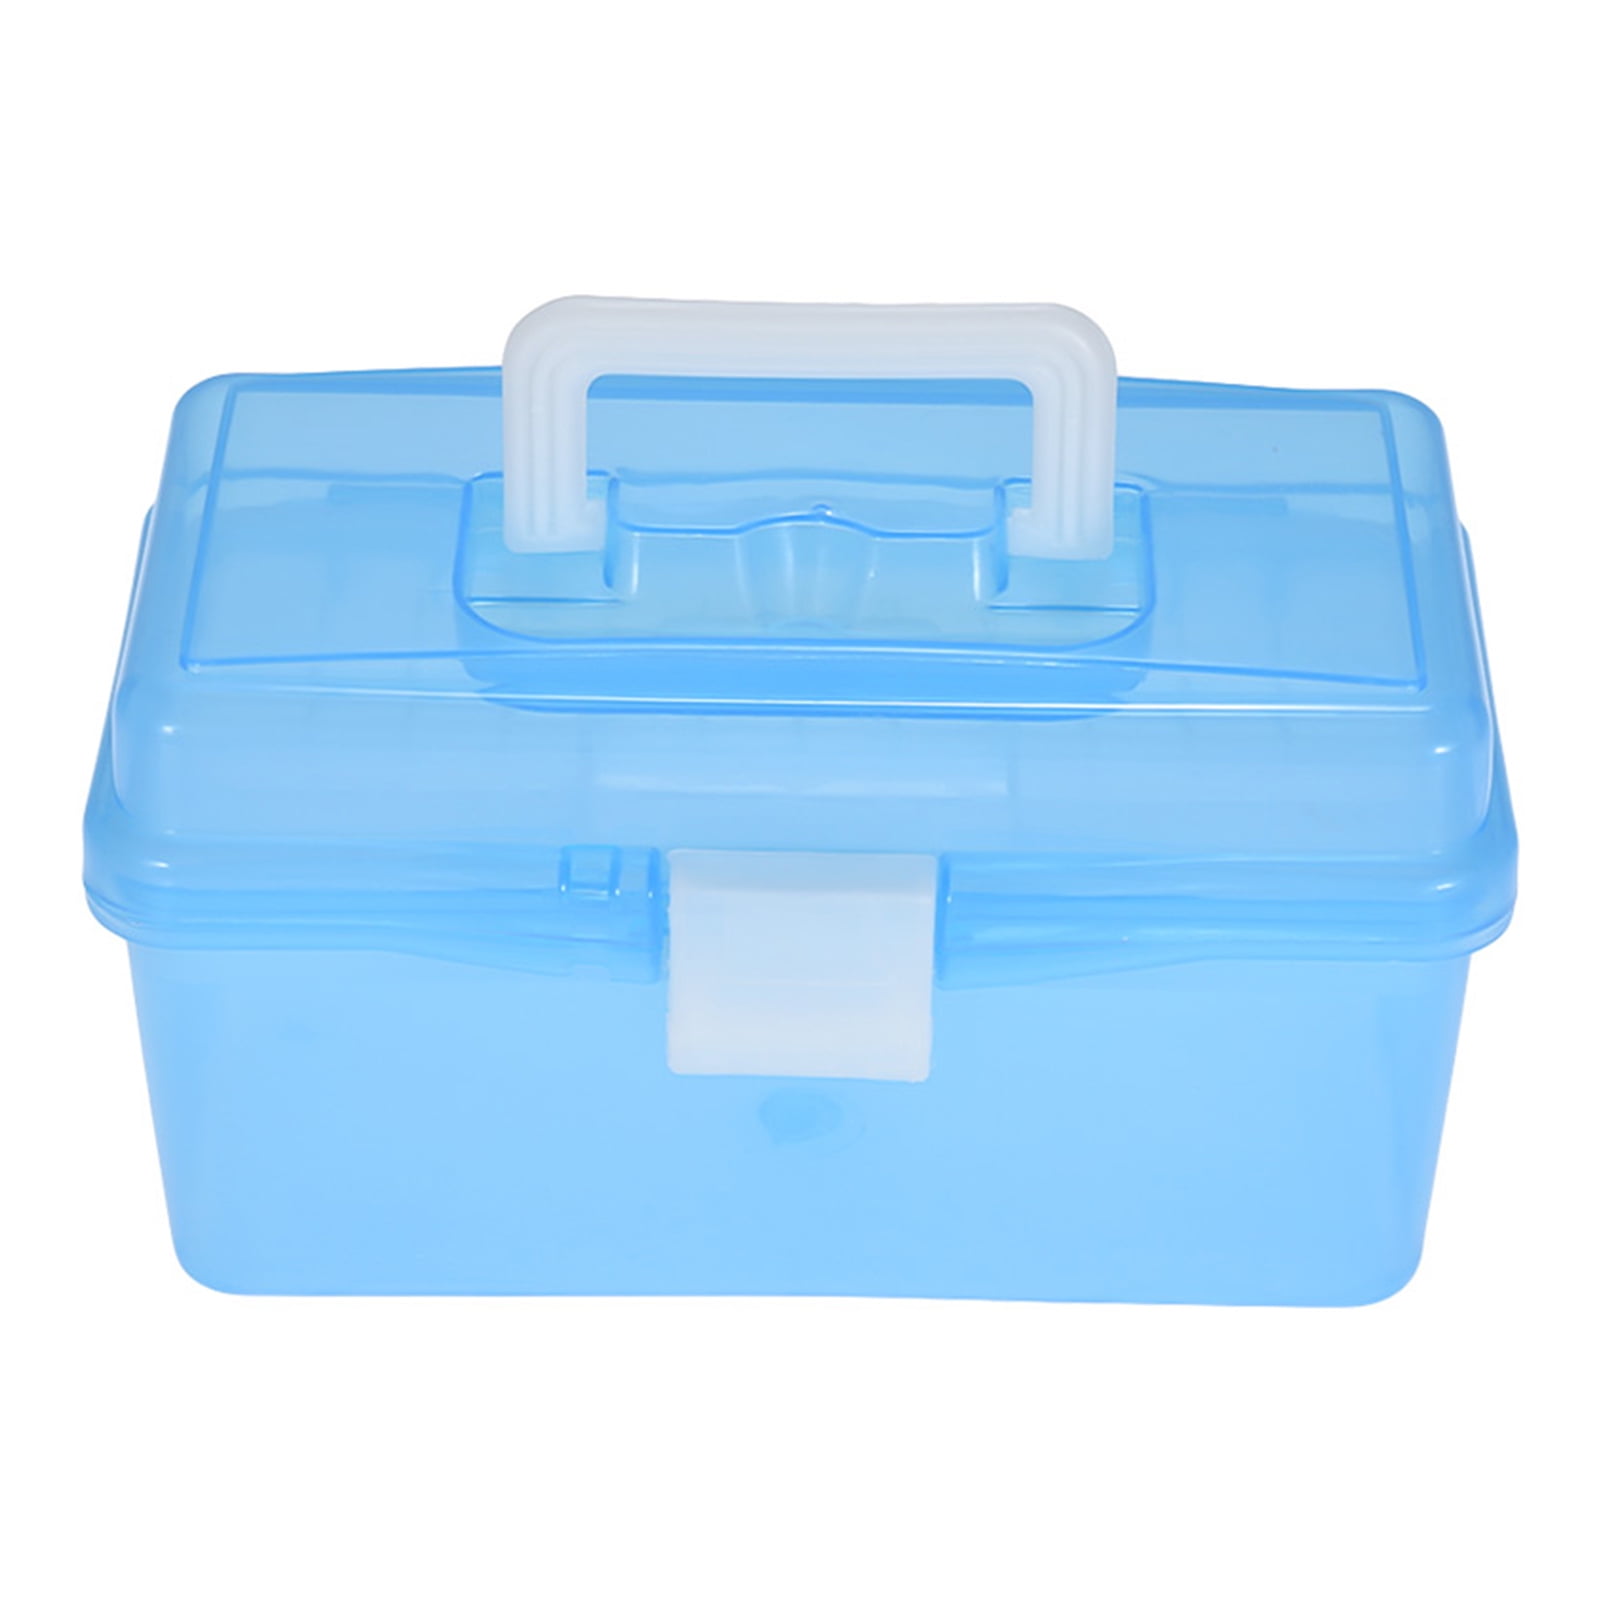 ARTBIN ESSENTIALS LIFT OUT TRAY BOX with HANDLE is CLEAR for CRAFT STORAGE case 